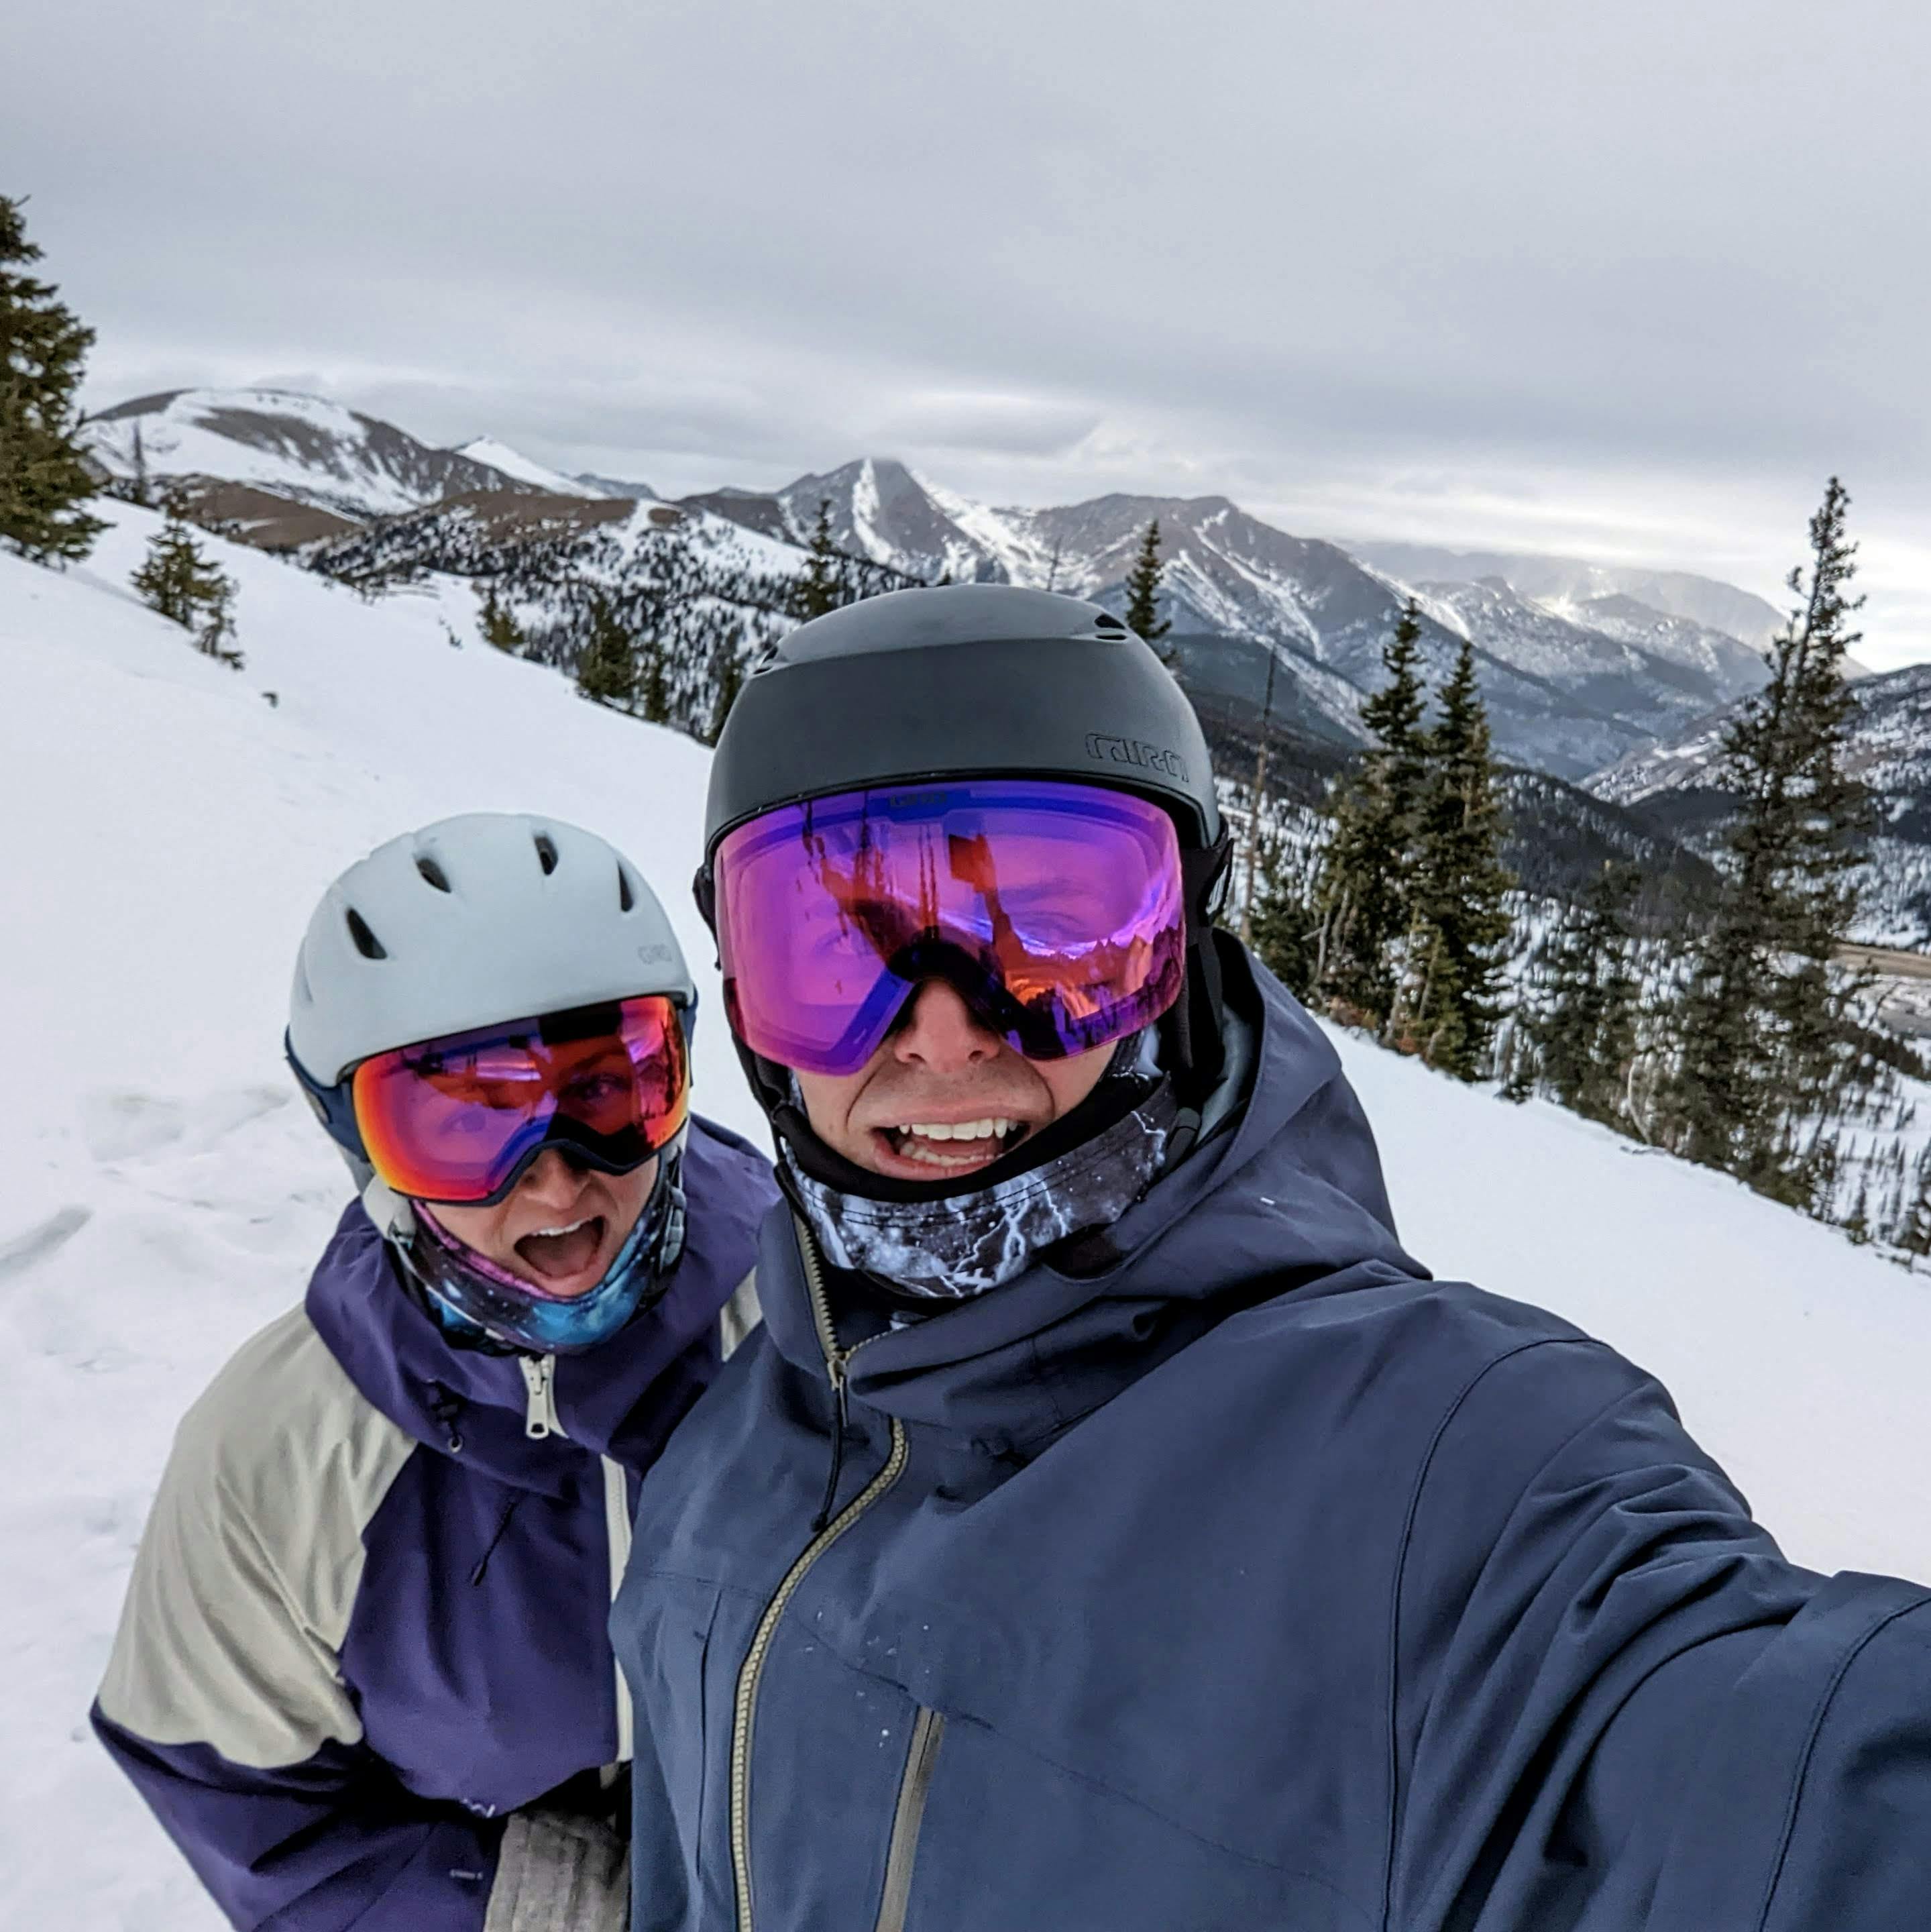 Selfie of two skiers on a ski run. There are snowy mountains in the background. 